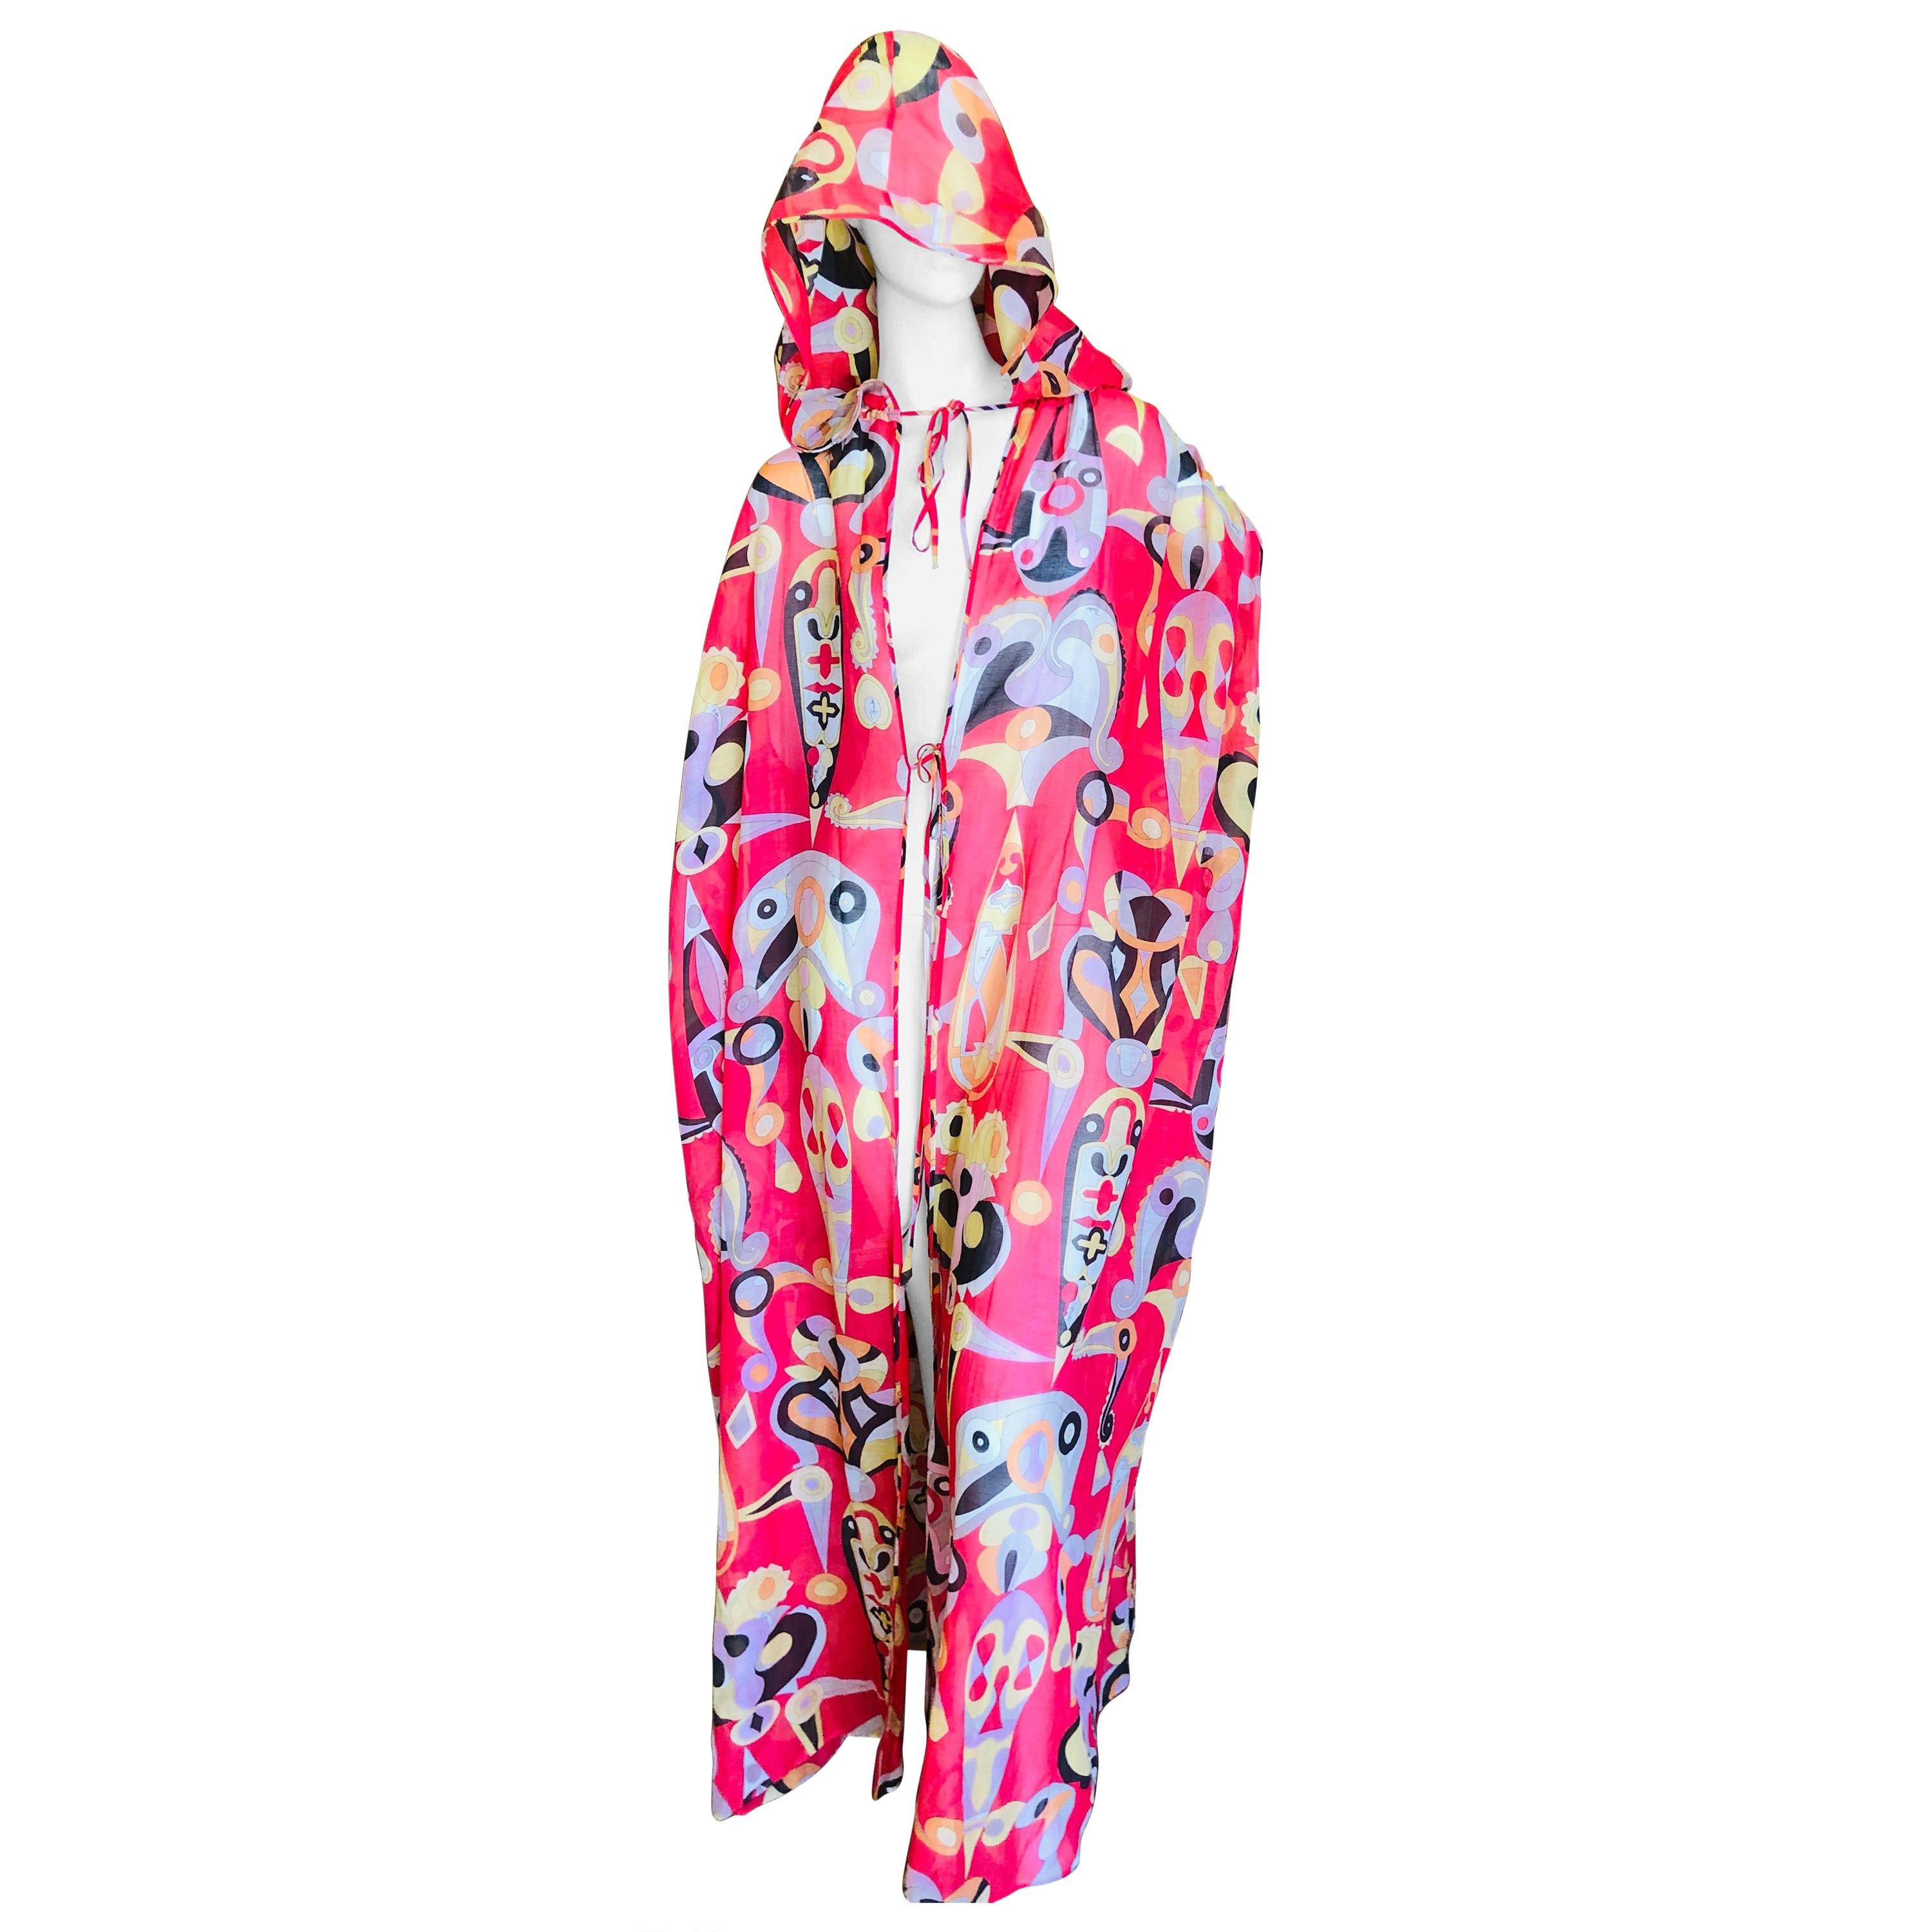 Emilio Pucci Colorful Pattern Sleeveless Hooded Caftan Beach Cover New For Sale